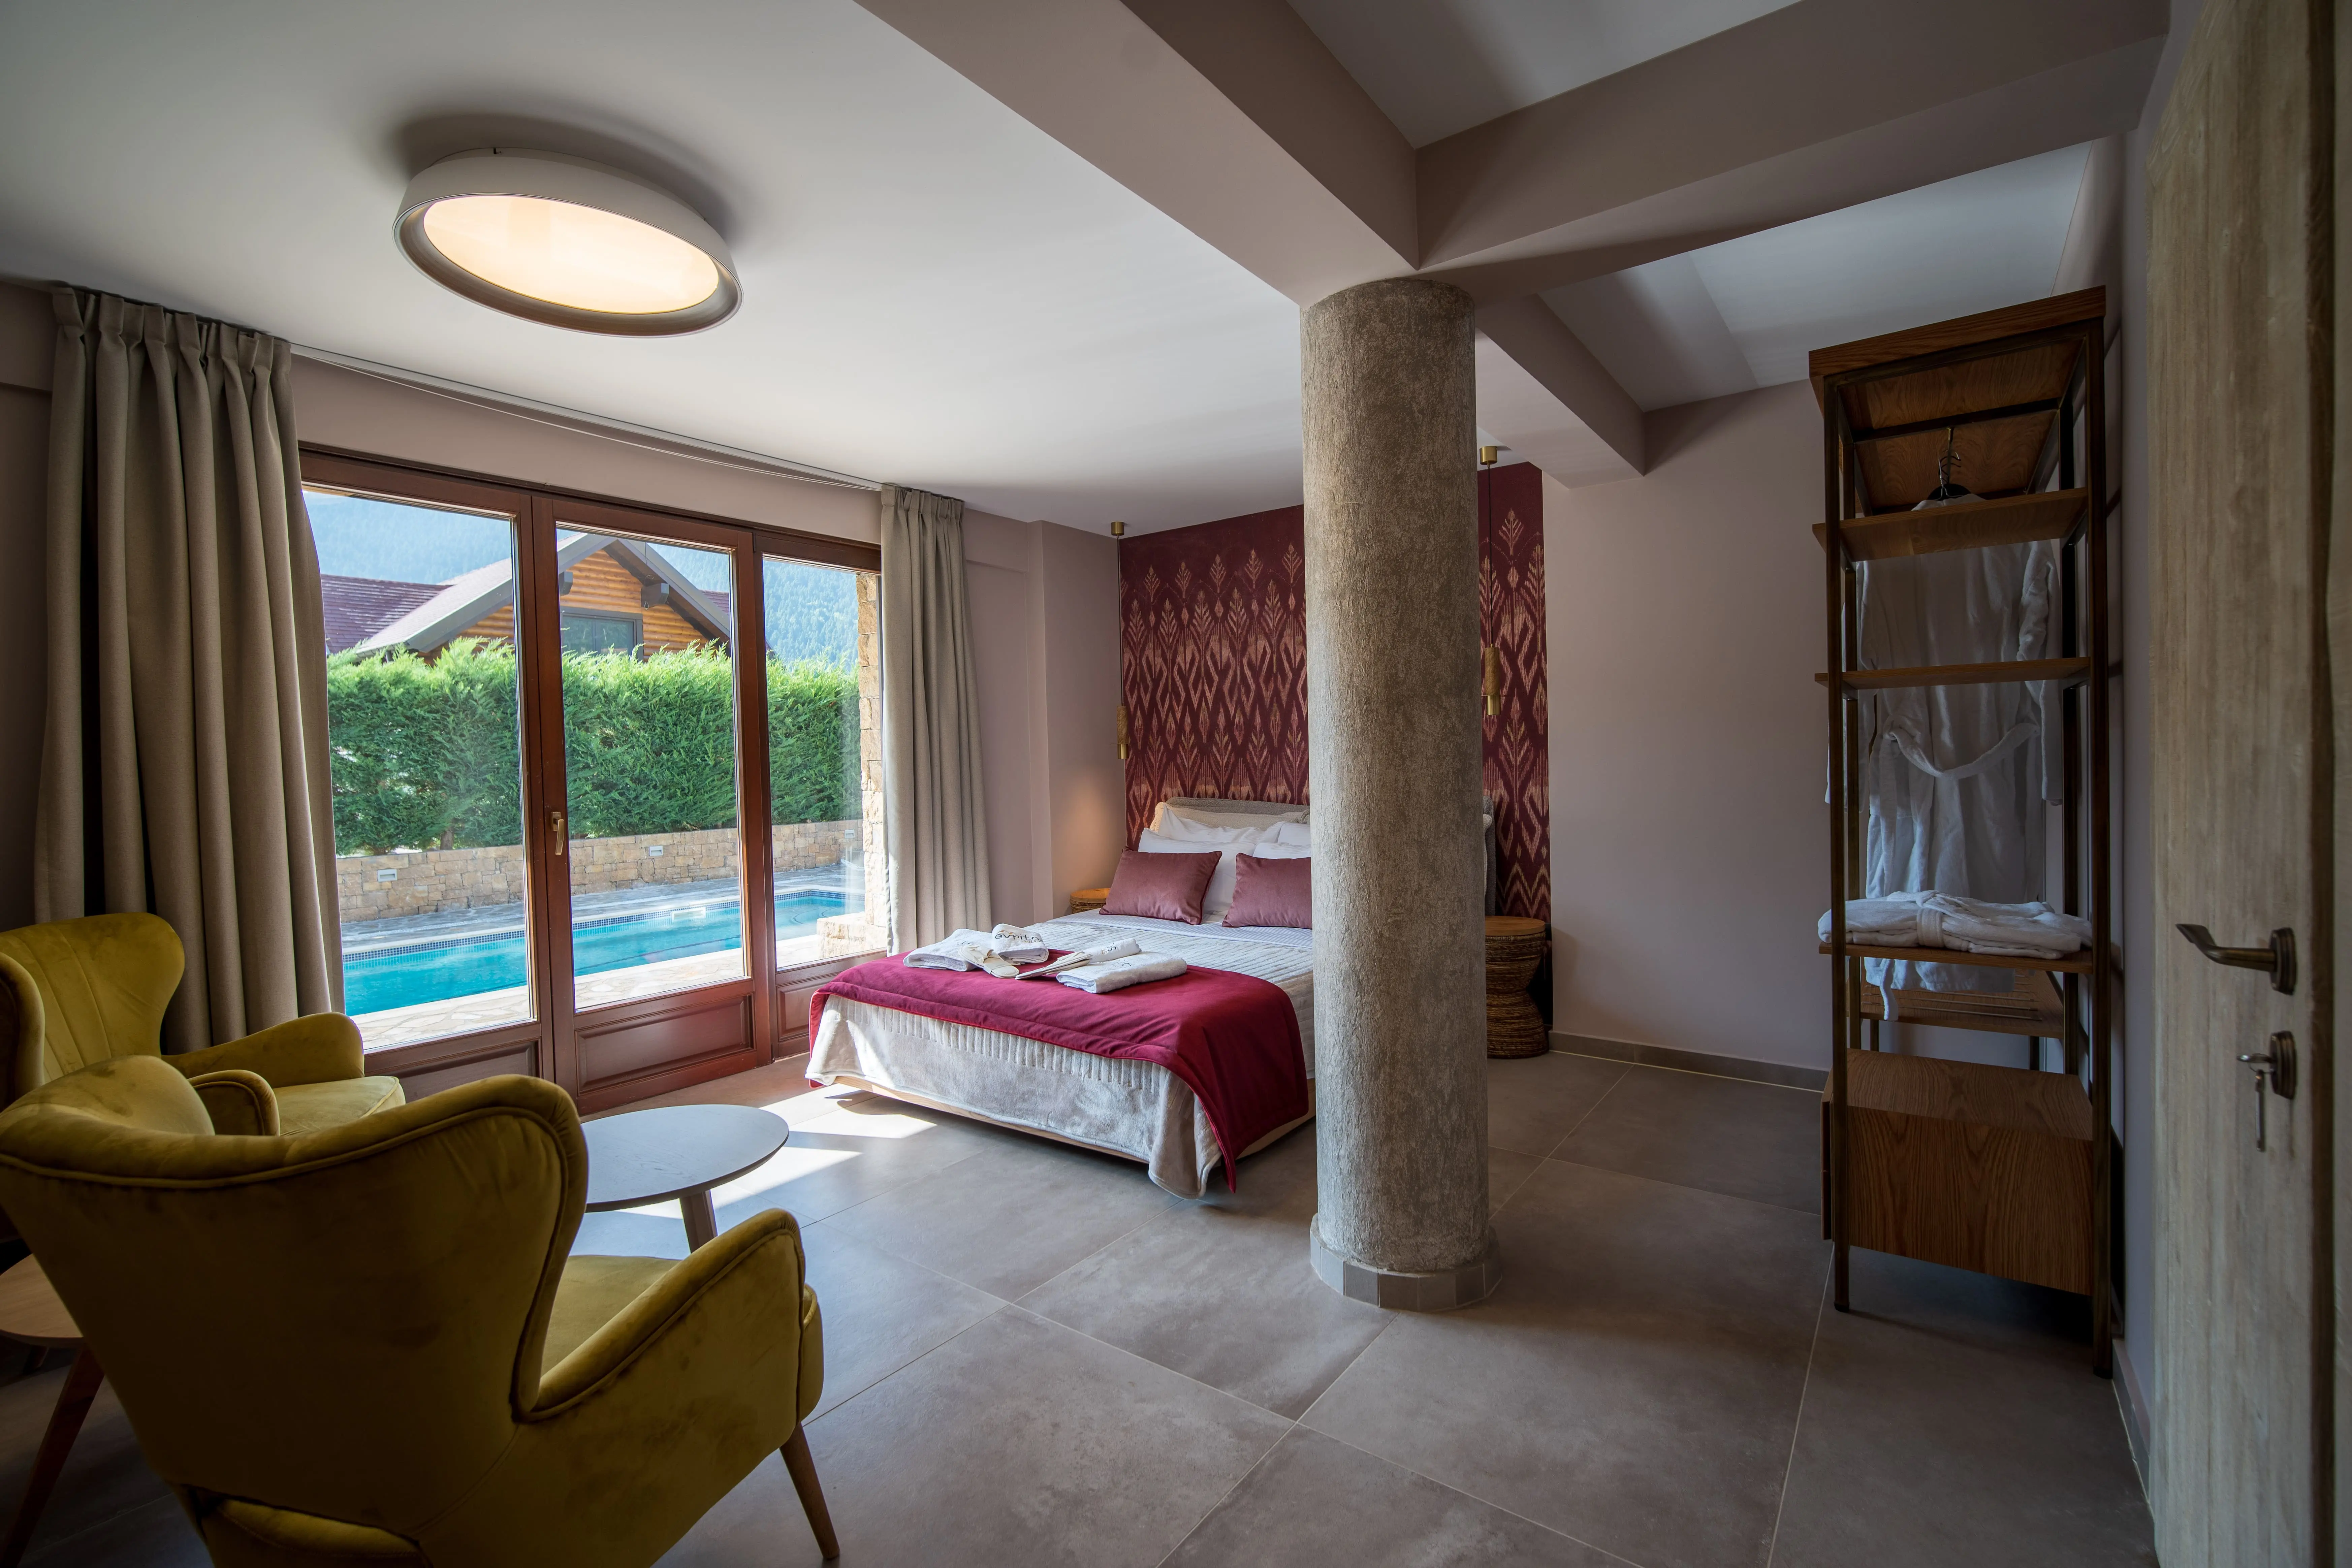 Design suite bedroom in Evritos Villas with kingsize bed and direct access to the outdoor pool